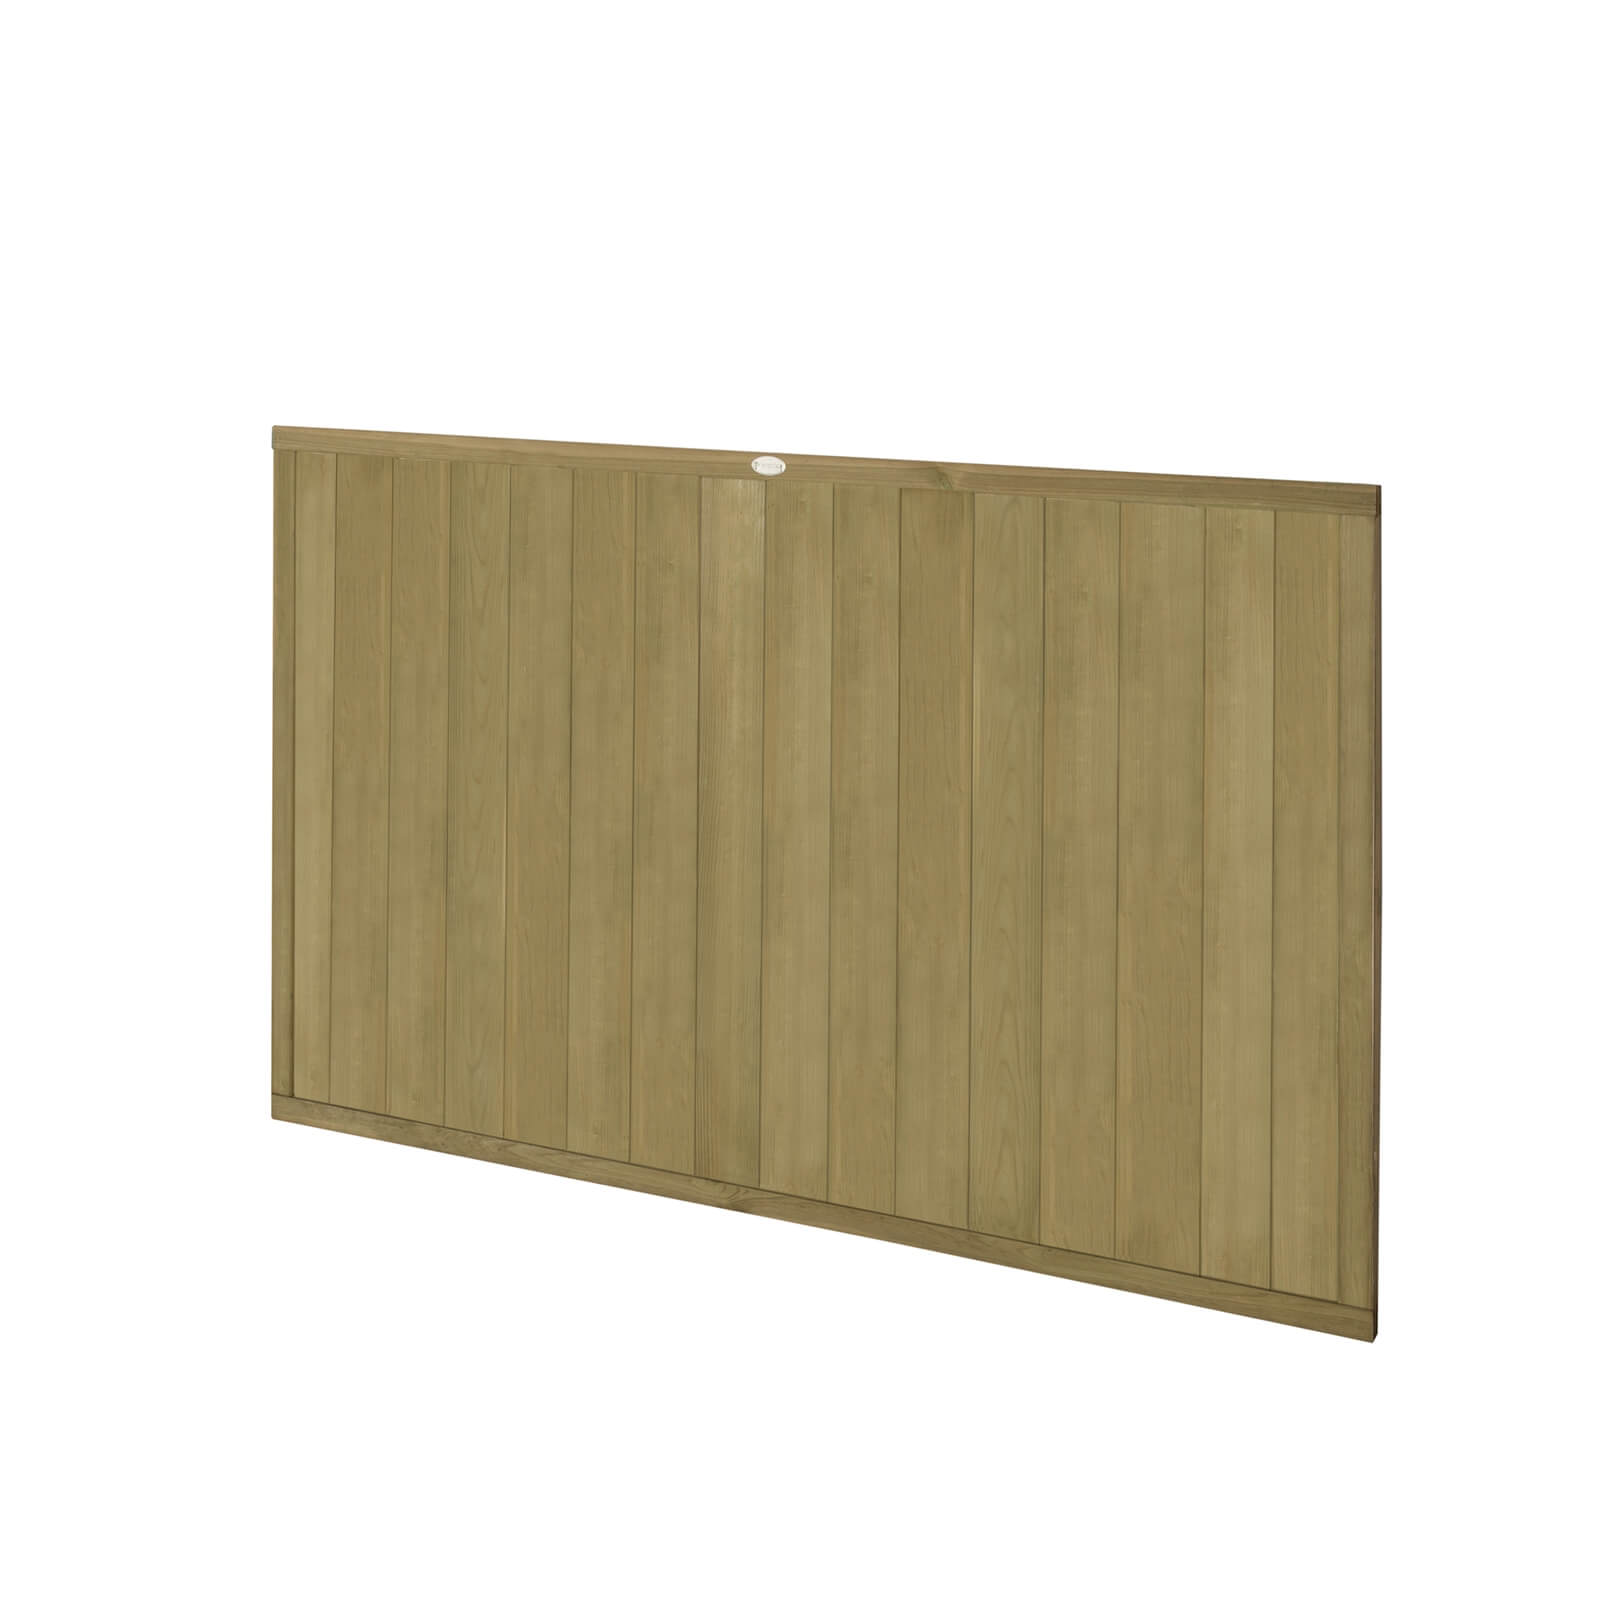 Forest Vertical Tongue & Groove Fence Panel - 4ft - Pack of 4